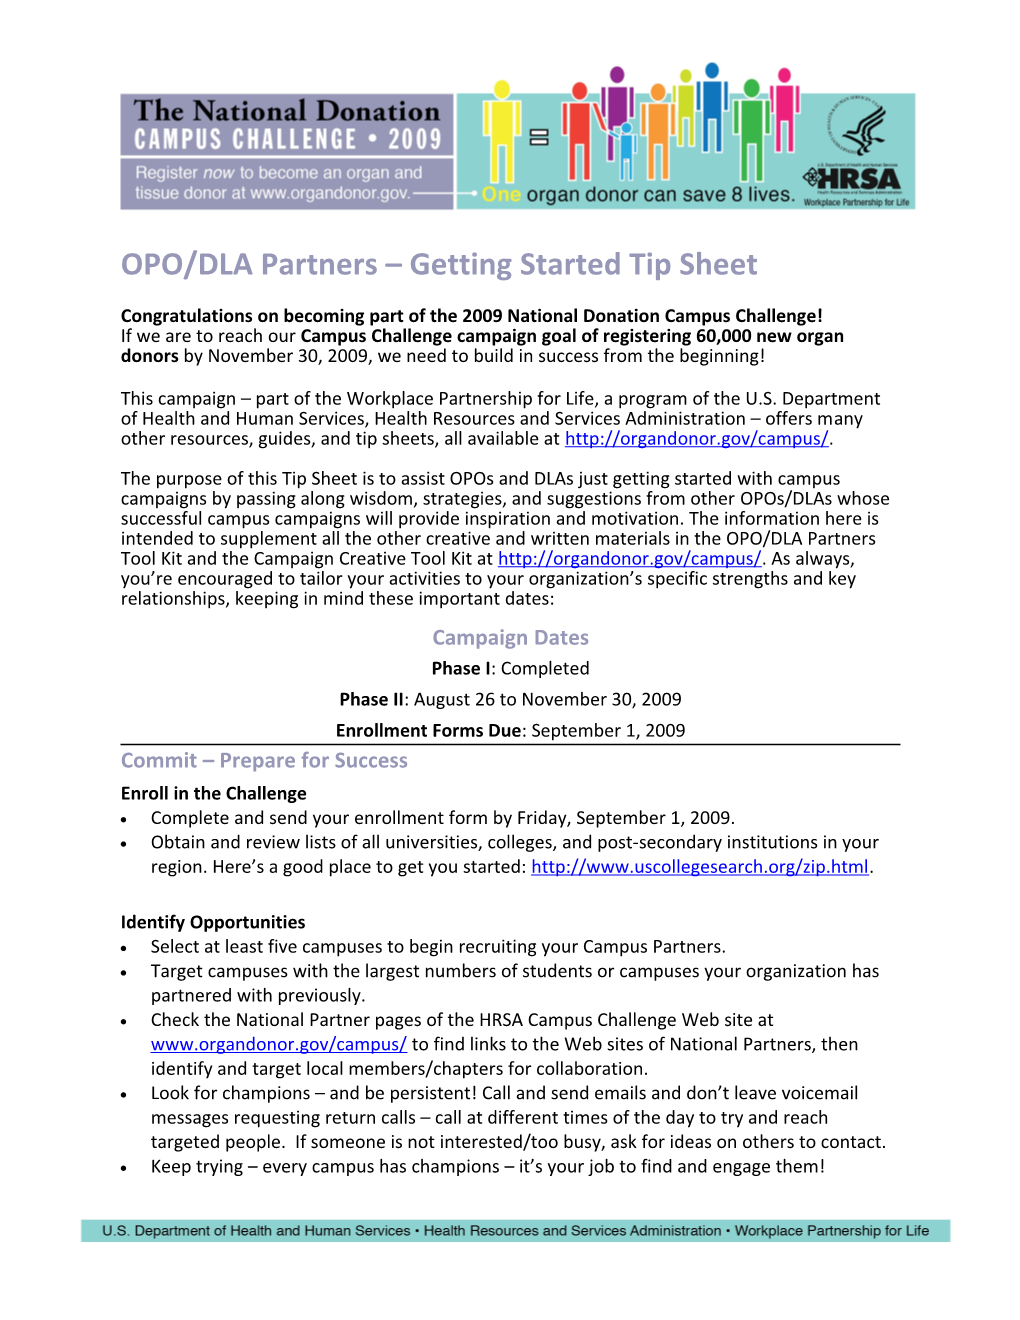 OPO/DLA Partners Getting Started Tip Sheet